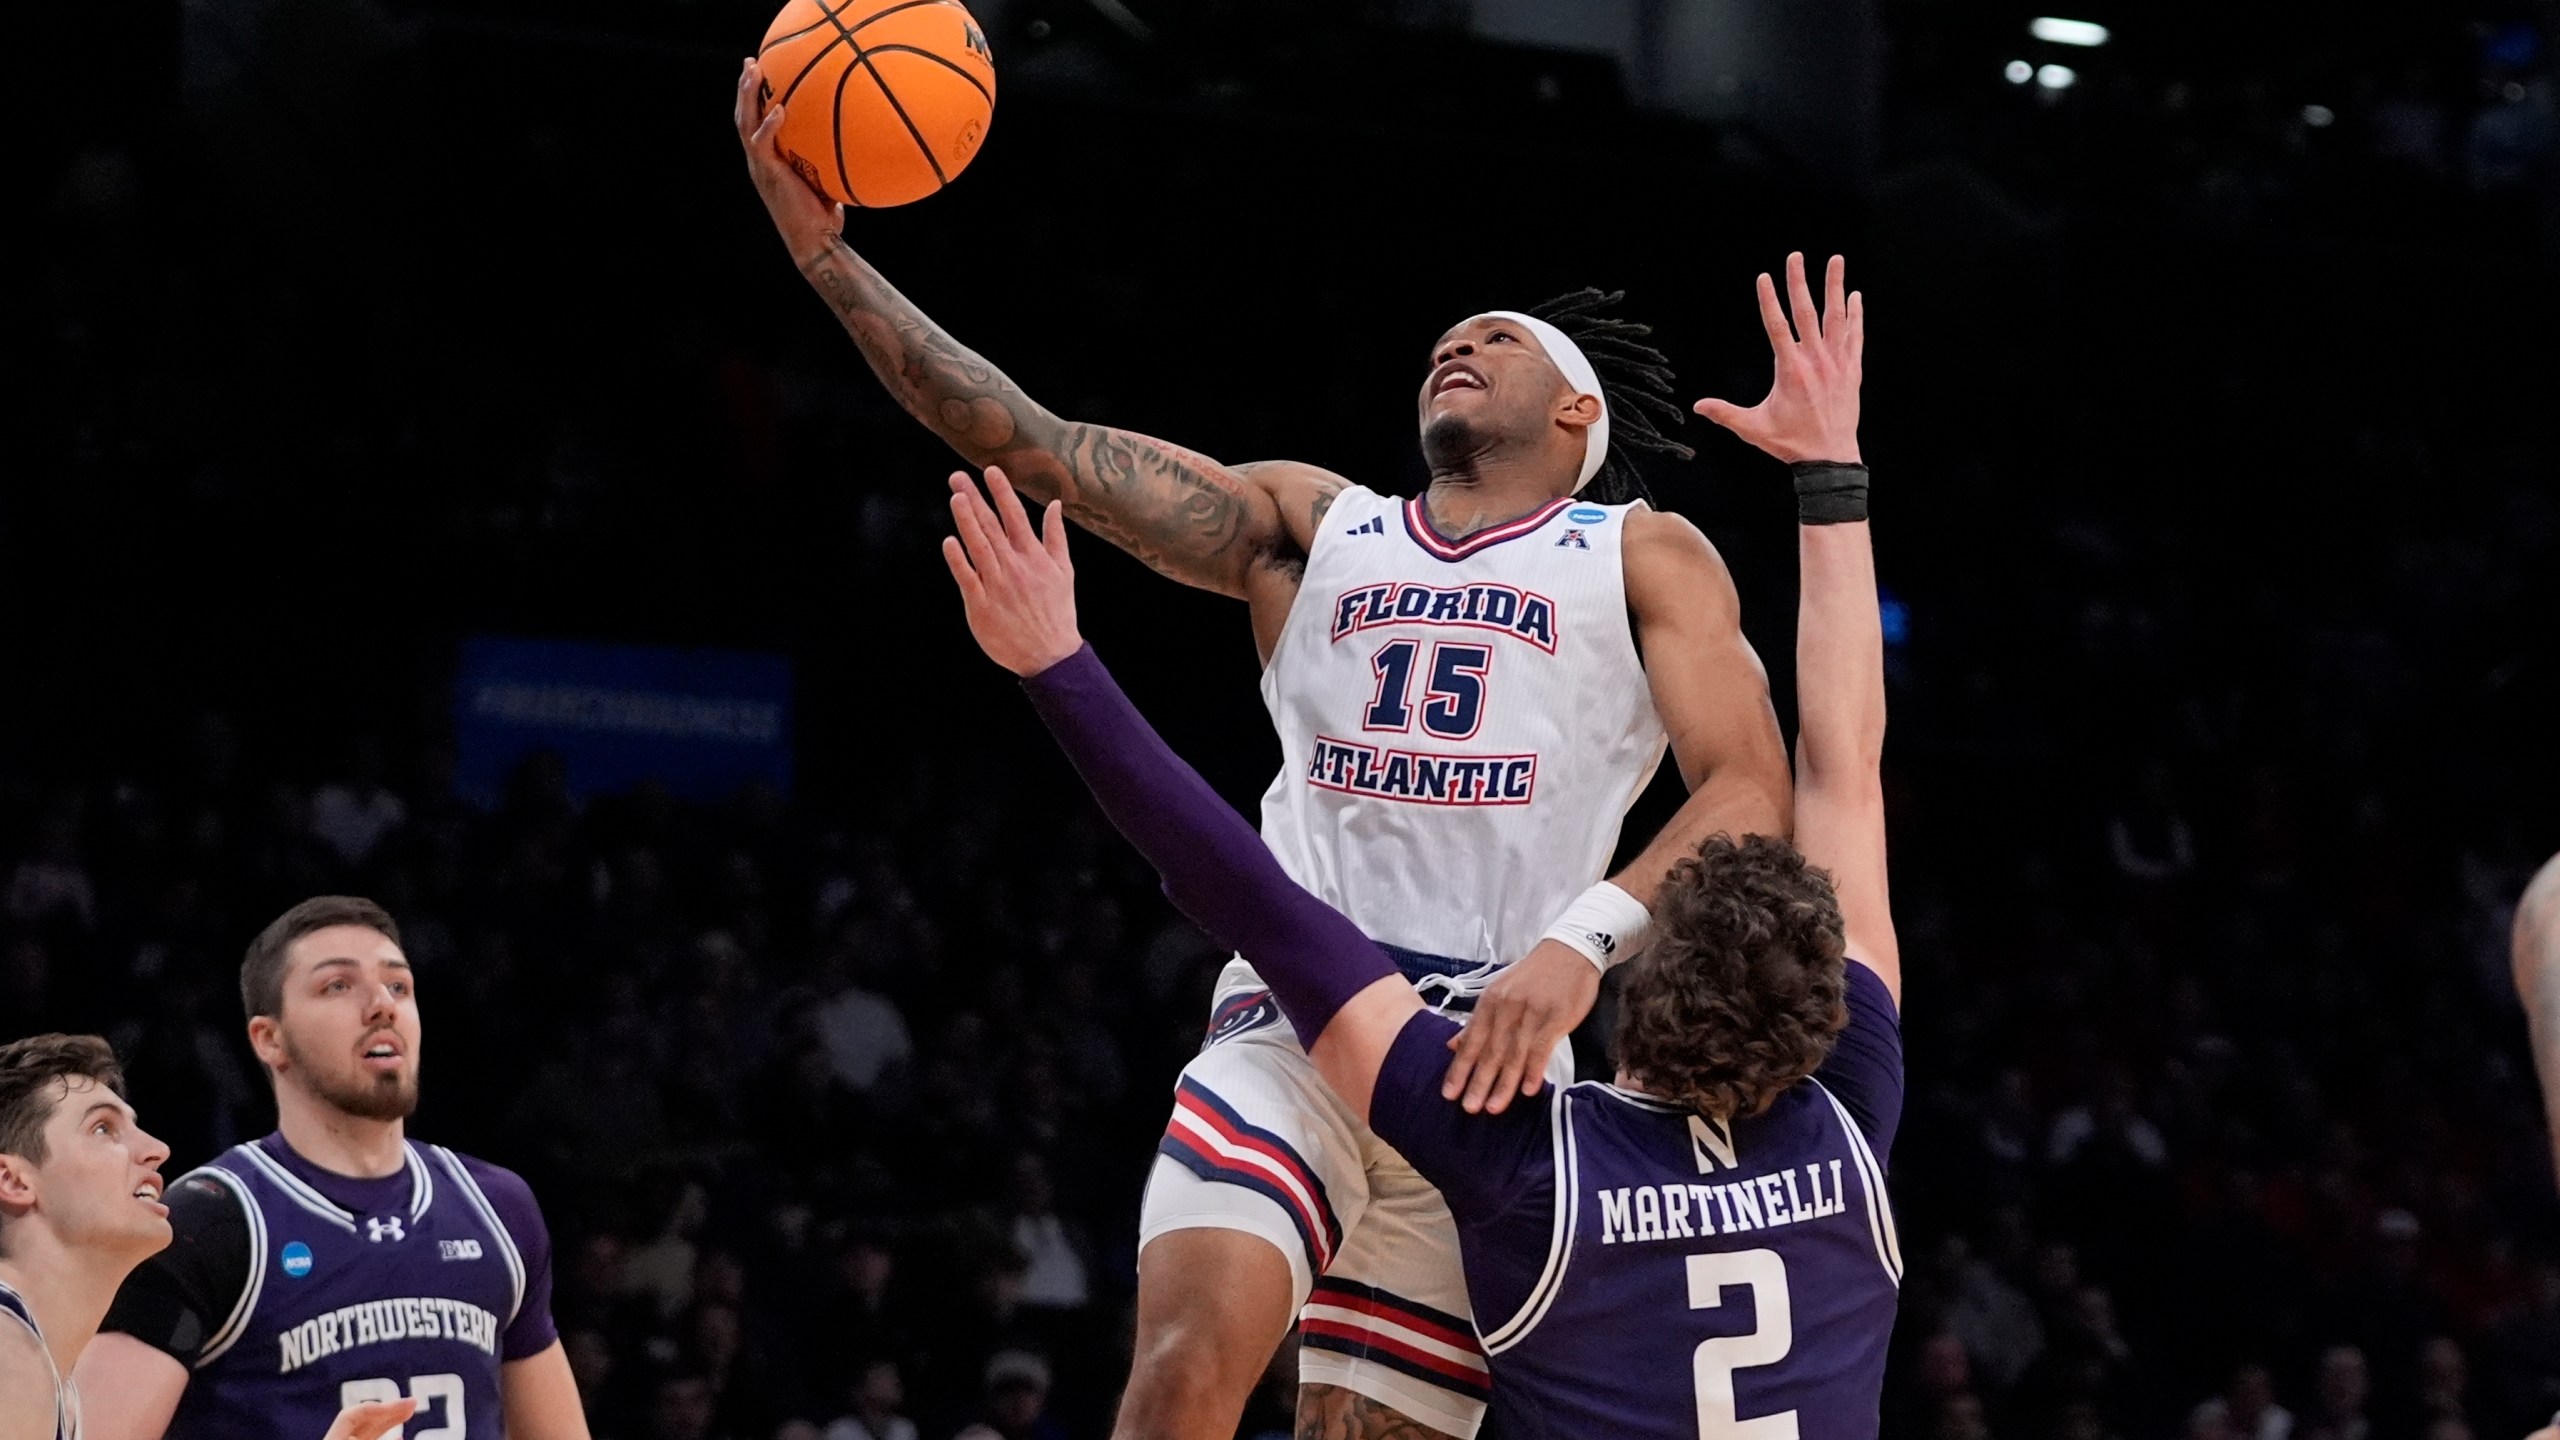 Florida Atlantic's Alijah Martin (15) drives past Northwestern's Nick Martinelli (2) during the first half of a first-round college basketball game in the NCAA Tournament, Friday, March 22, 2024, in New York. (AP Photo/Frank Franklin II)